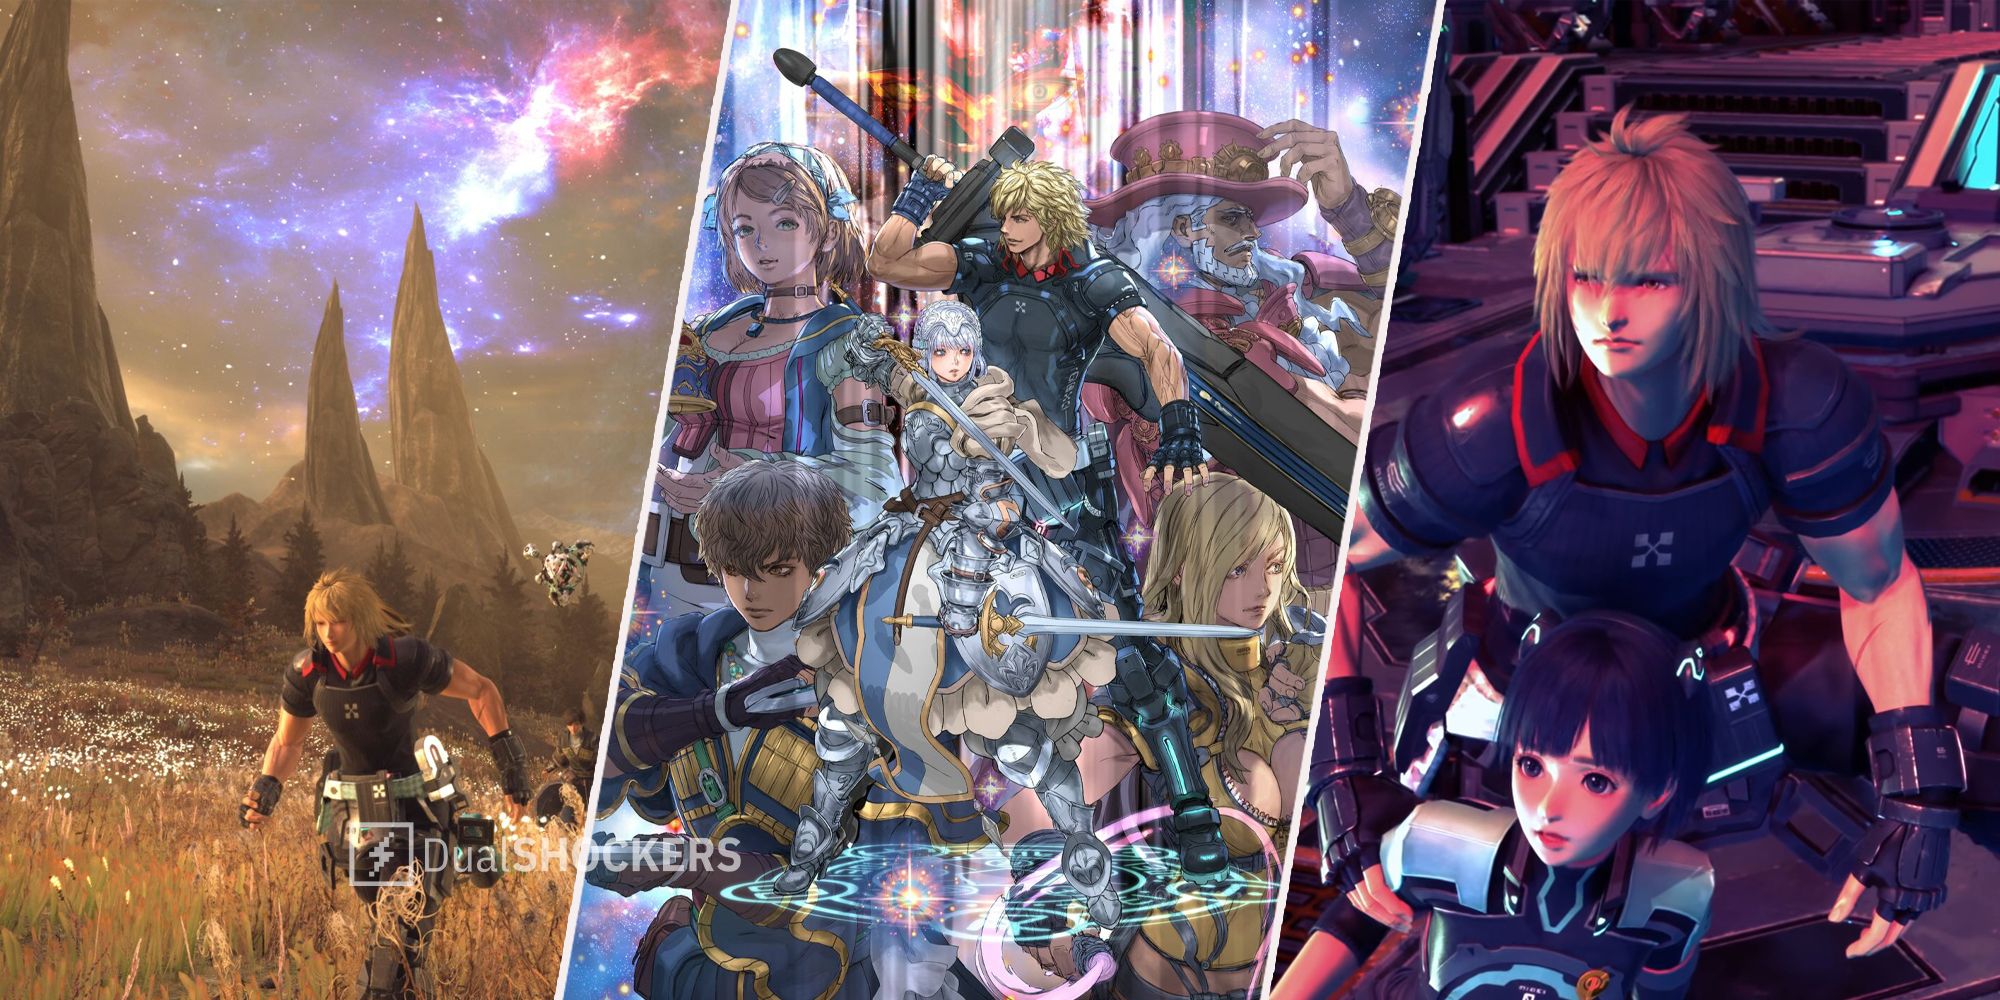 How Long Does It Take To Beat Star Ocean: The Divine Force?